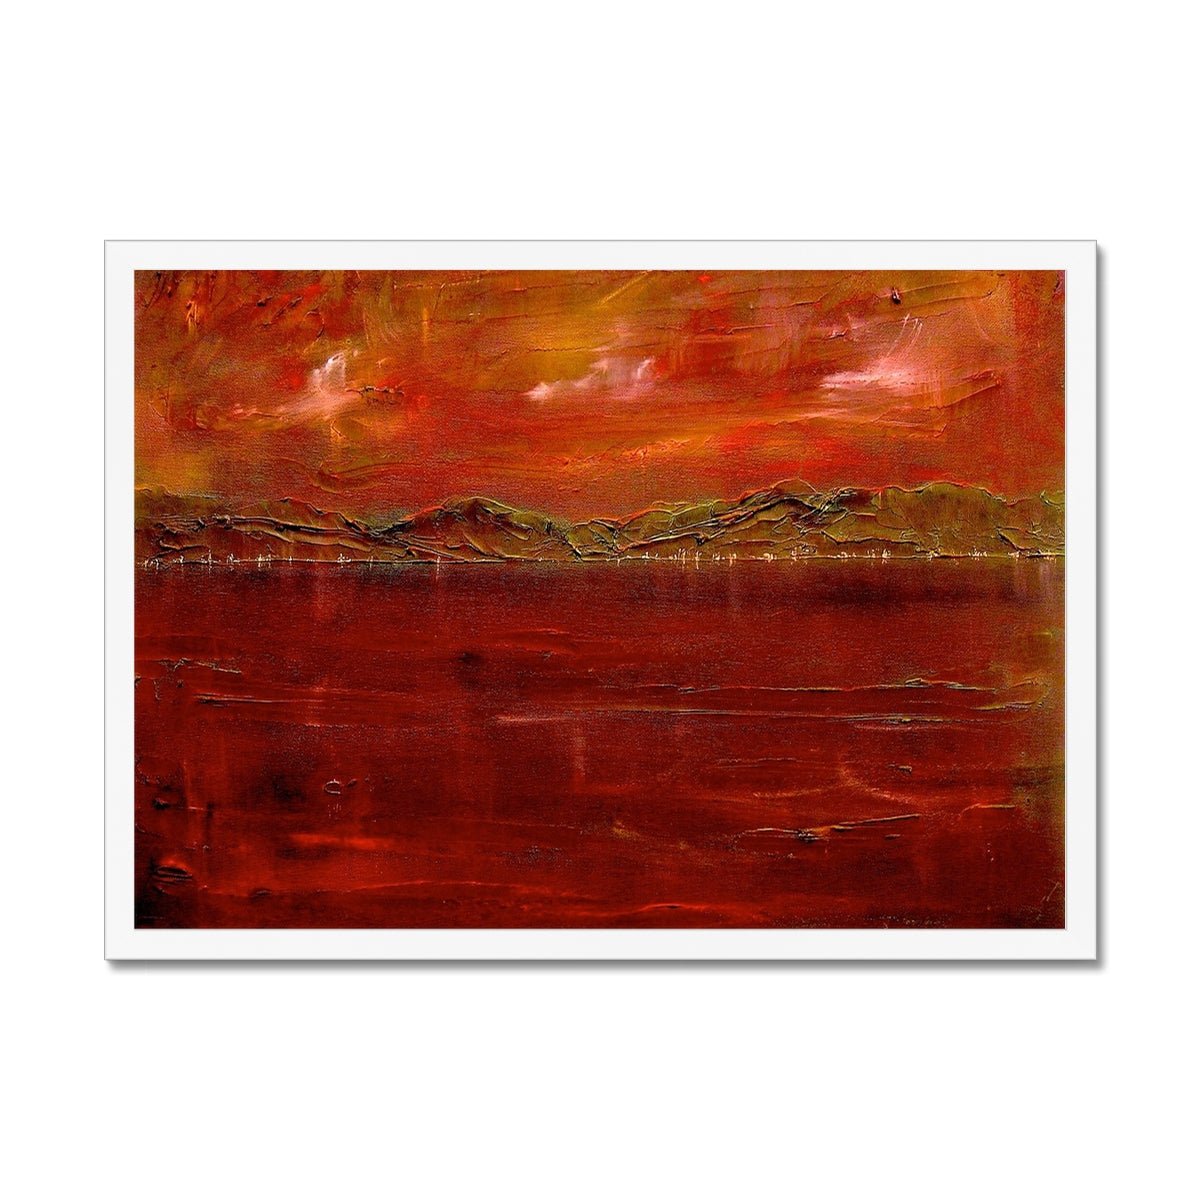 Deep Clyde Dusk Painting | Framed Prints From Scotland-Framed Prints-River Clyde Art Gallery-A2 Landscape-White Frame-Paintings, Prints, Homeware, Art Gifts From Scotland By Scottish Artist Kevin Hunter